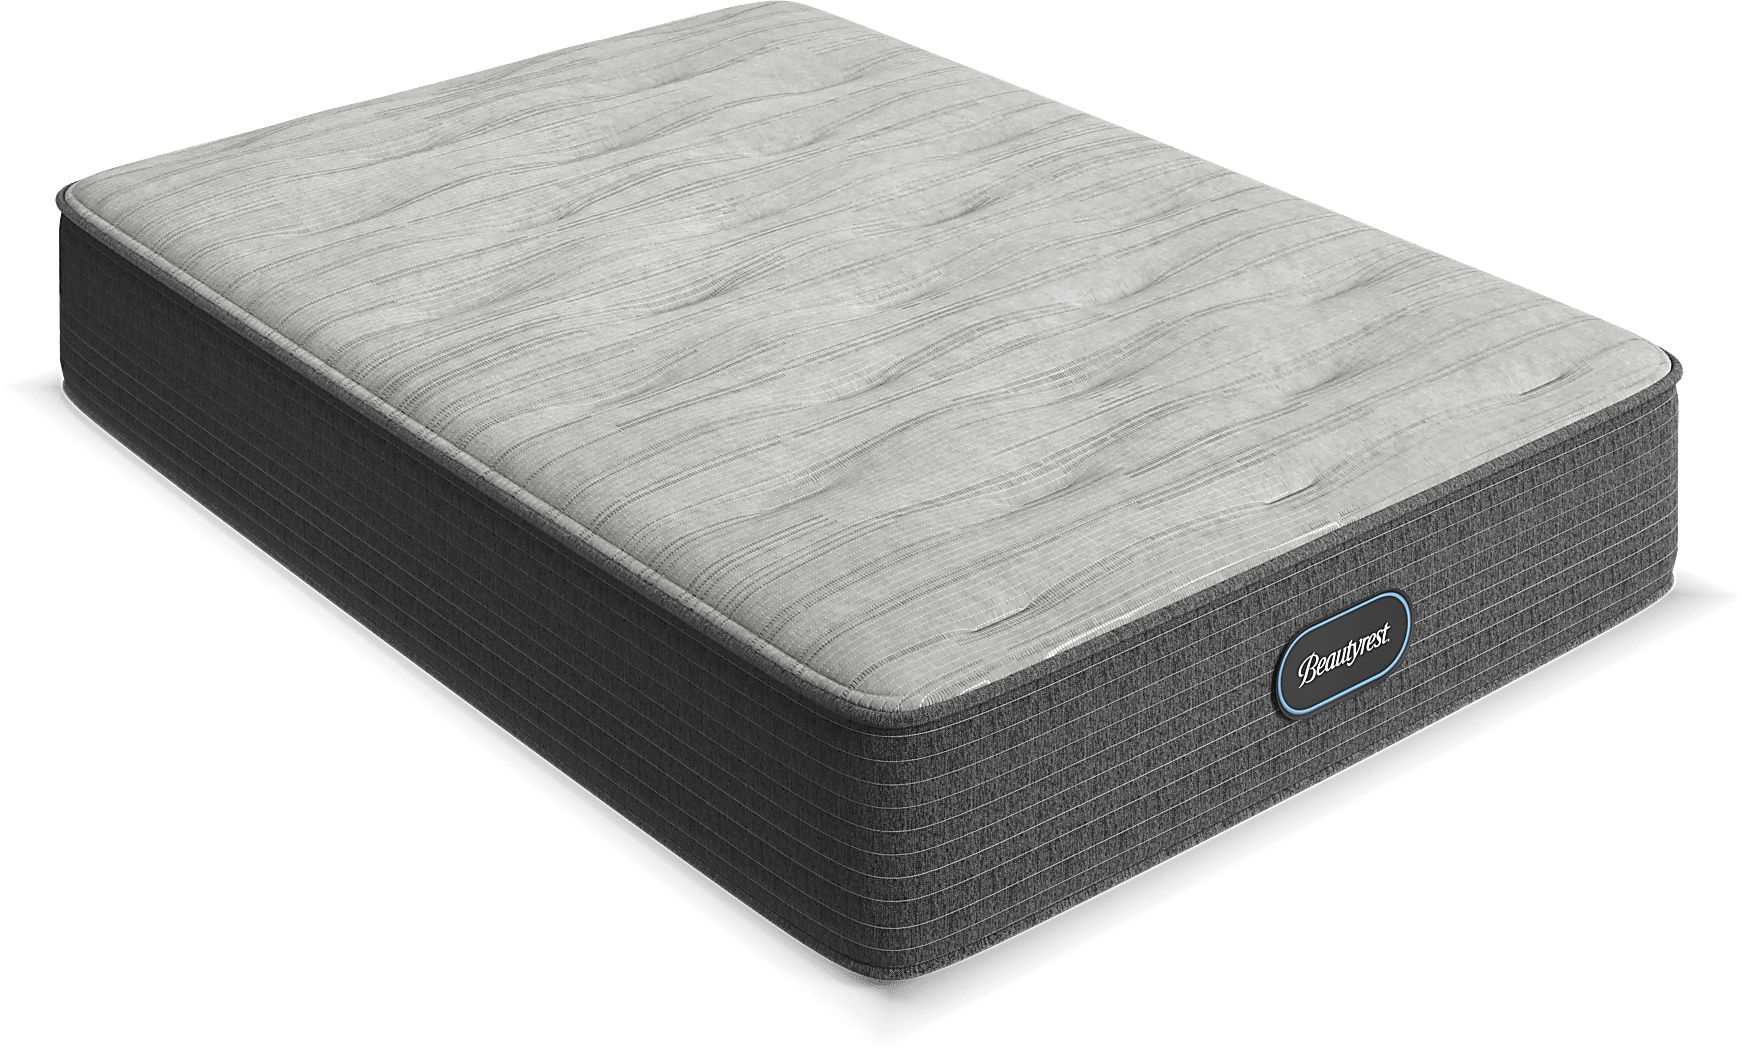 https://assets.roomstogo.com/product/beautyrest-select-eminence-full-mattress_50310691_image-item?cache-id=4752734ae63e6716ccad9447229c4de8